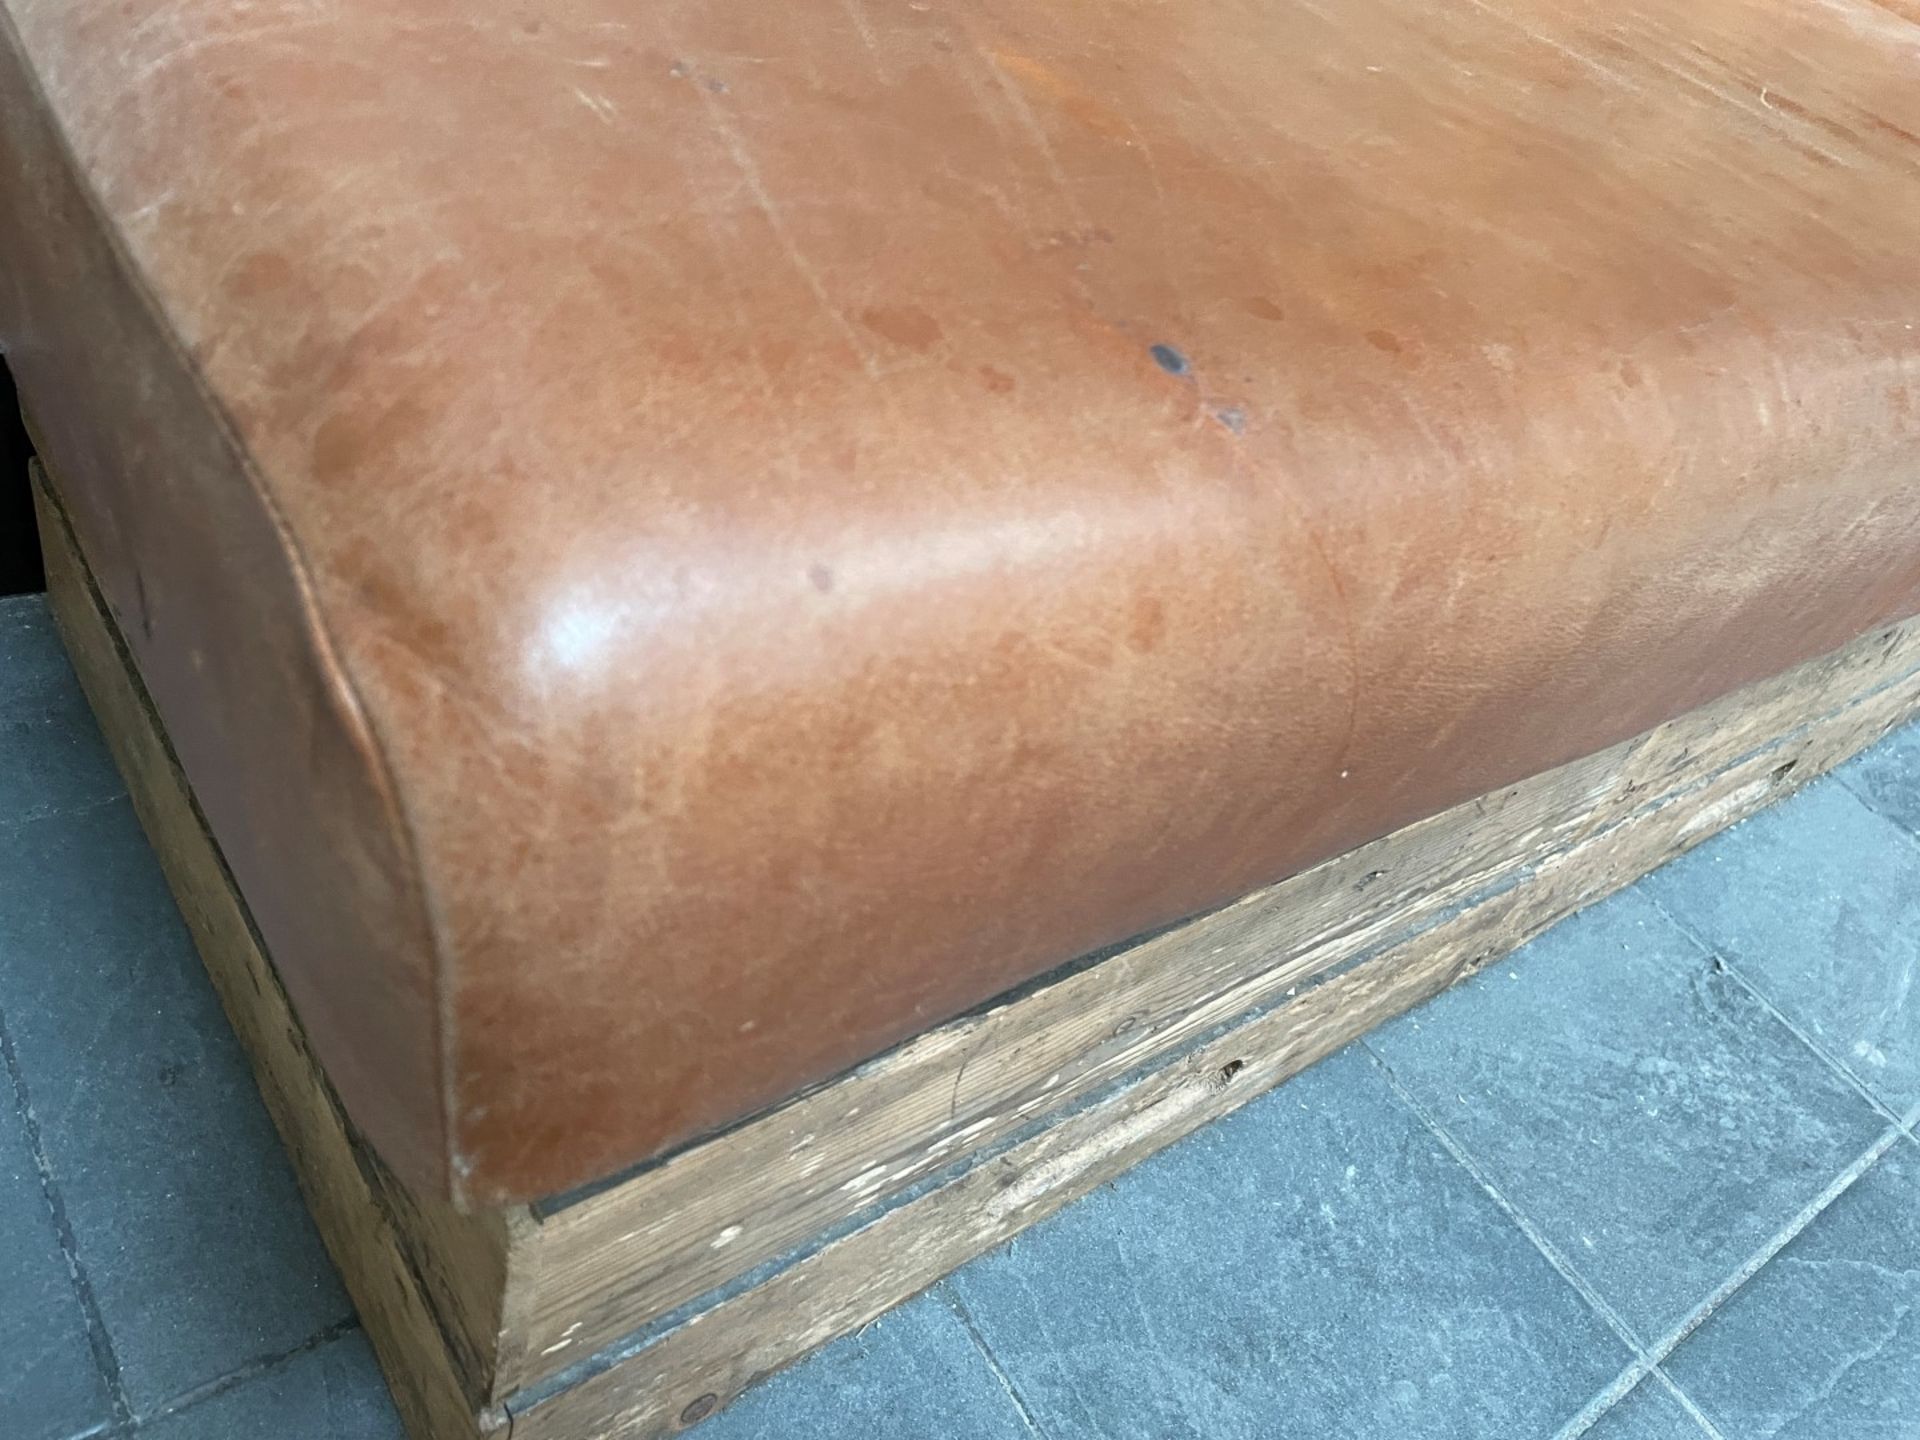 1 x Rustic Wooden Seating Bench Featuring Tan Leather Seat Pads - Suitable For Restaurants or Bars! - Image 8 of 12